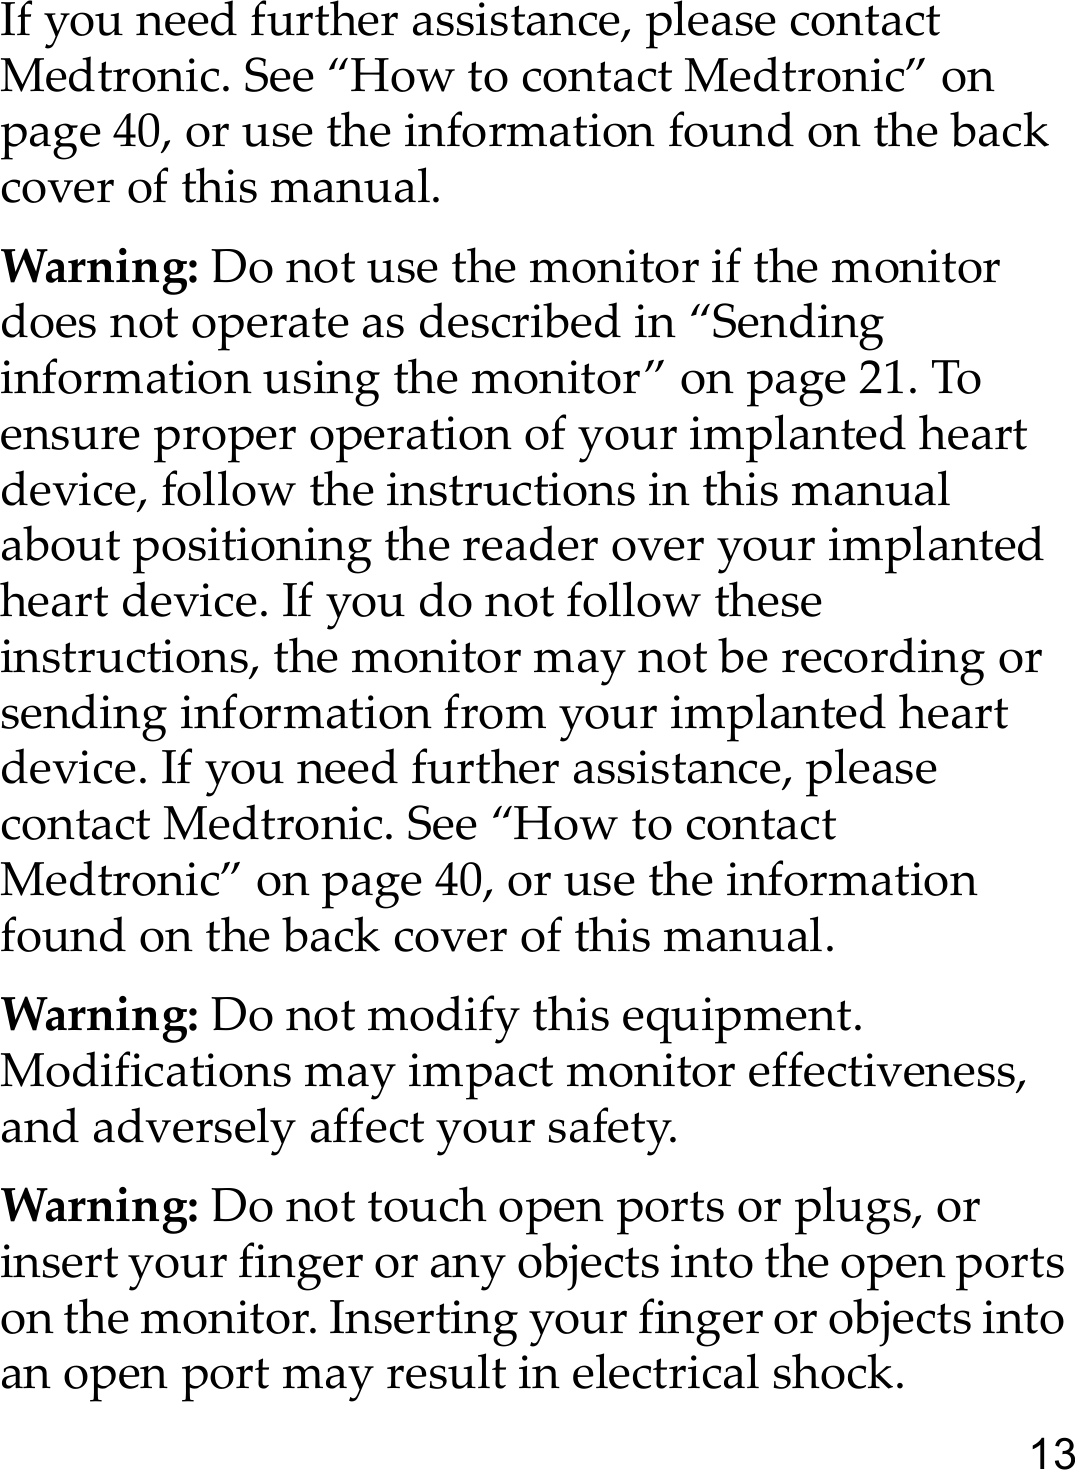 13If you need further assistance, please contact Medtronic. See “How to contact Medtronic” on page 40, or use the information found on the back cover of this manual. Warning: Do not use the monitor if the monitor does not operate as described in “Sending information using the monitor” on page 21. To ensure proper operation of your implanted heart device, follow the instructions in this manual about positioning the reader over your implanted heart device. If you do not follow these instructions, the monitor may not be recording or sending information from your implanted heart device. If you need further assistance, please contact Medtronic. See “How to contact Medtronic” on page 40, or use the information found on the back cover of this manual. Warning: Do not modify this equipment. Modifications may impact monitor effectiveness, and adversely affect your safety.Warning: Do not touch open ports or plugs, or insert your finger or any objects into the open ports on the monitor. Inserting your finger or objects into an open port may result in electrical shock.